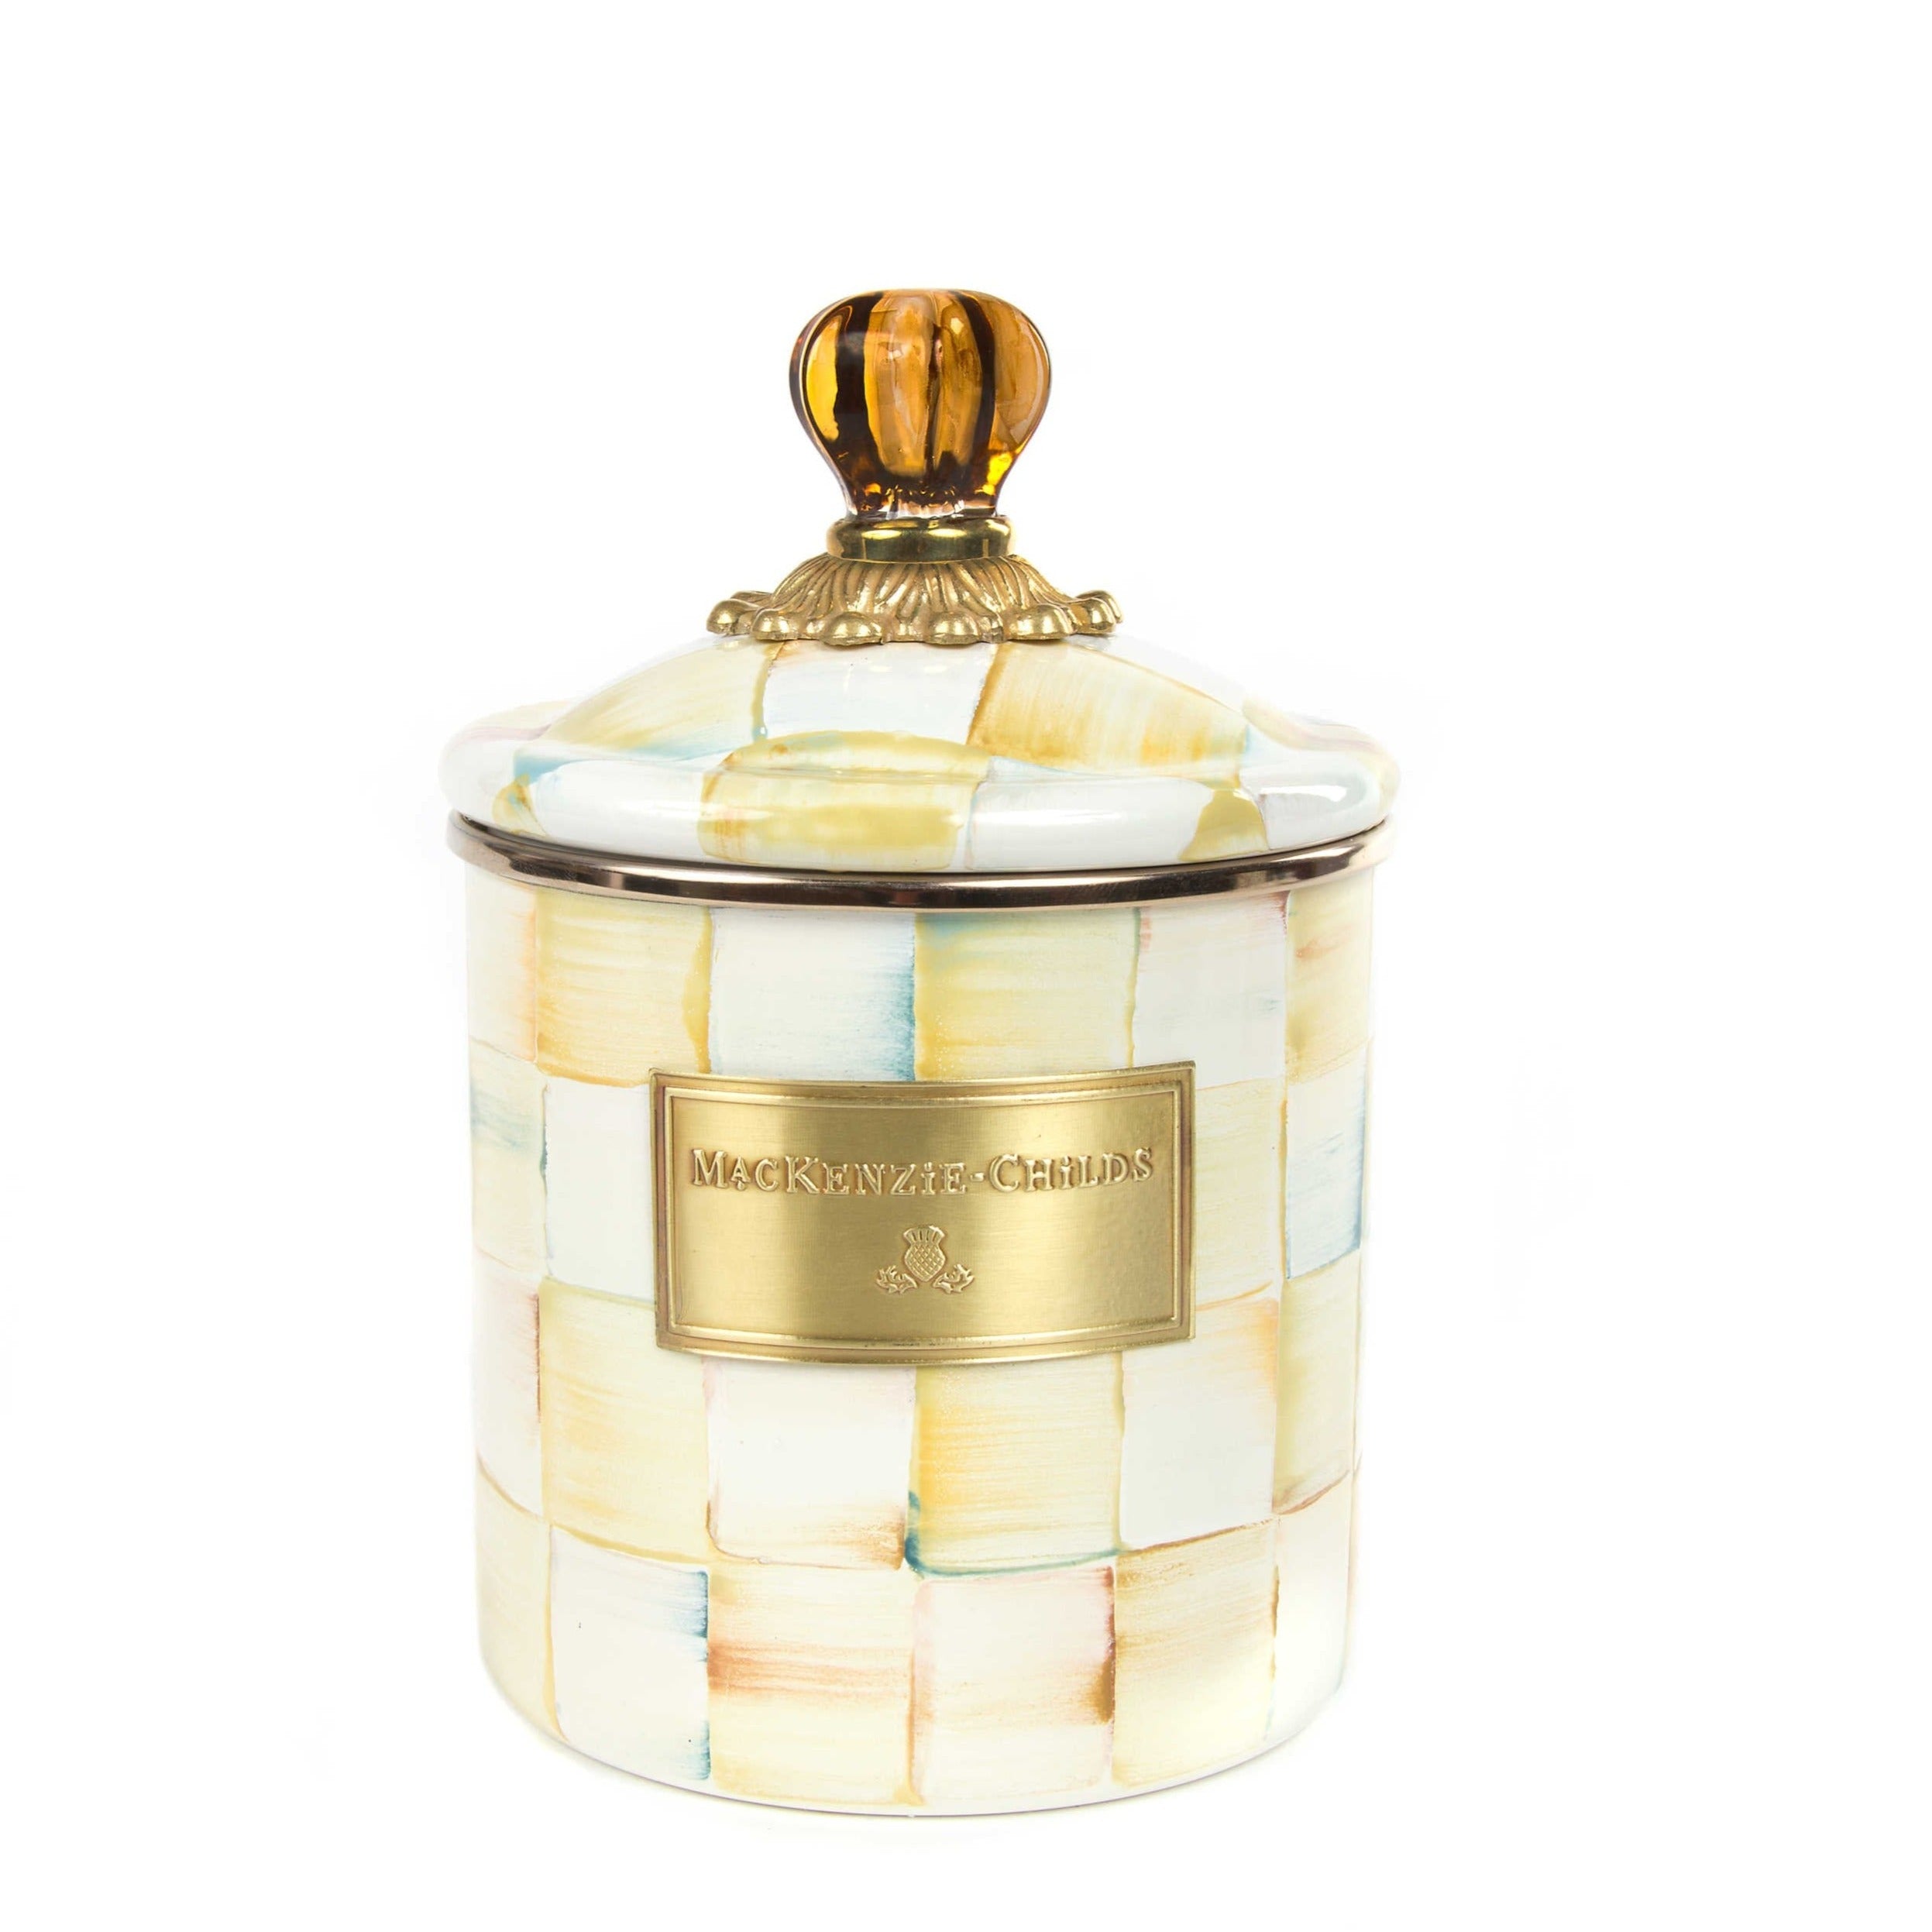 MacKenzie-Childs Parchment Canister